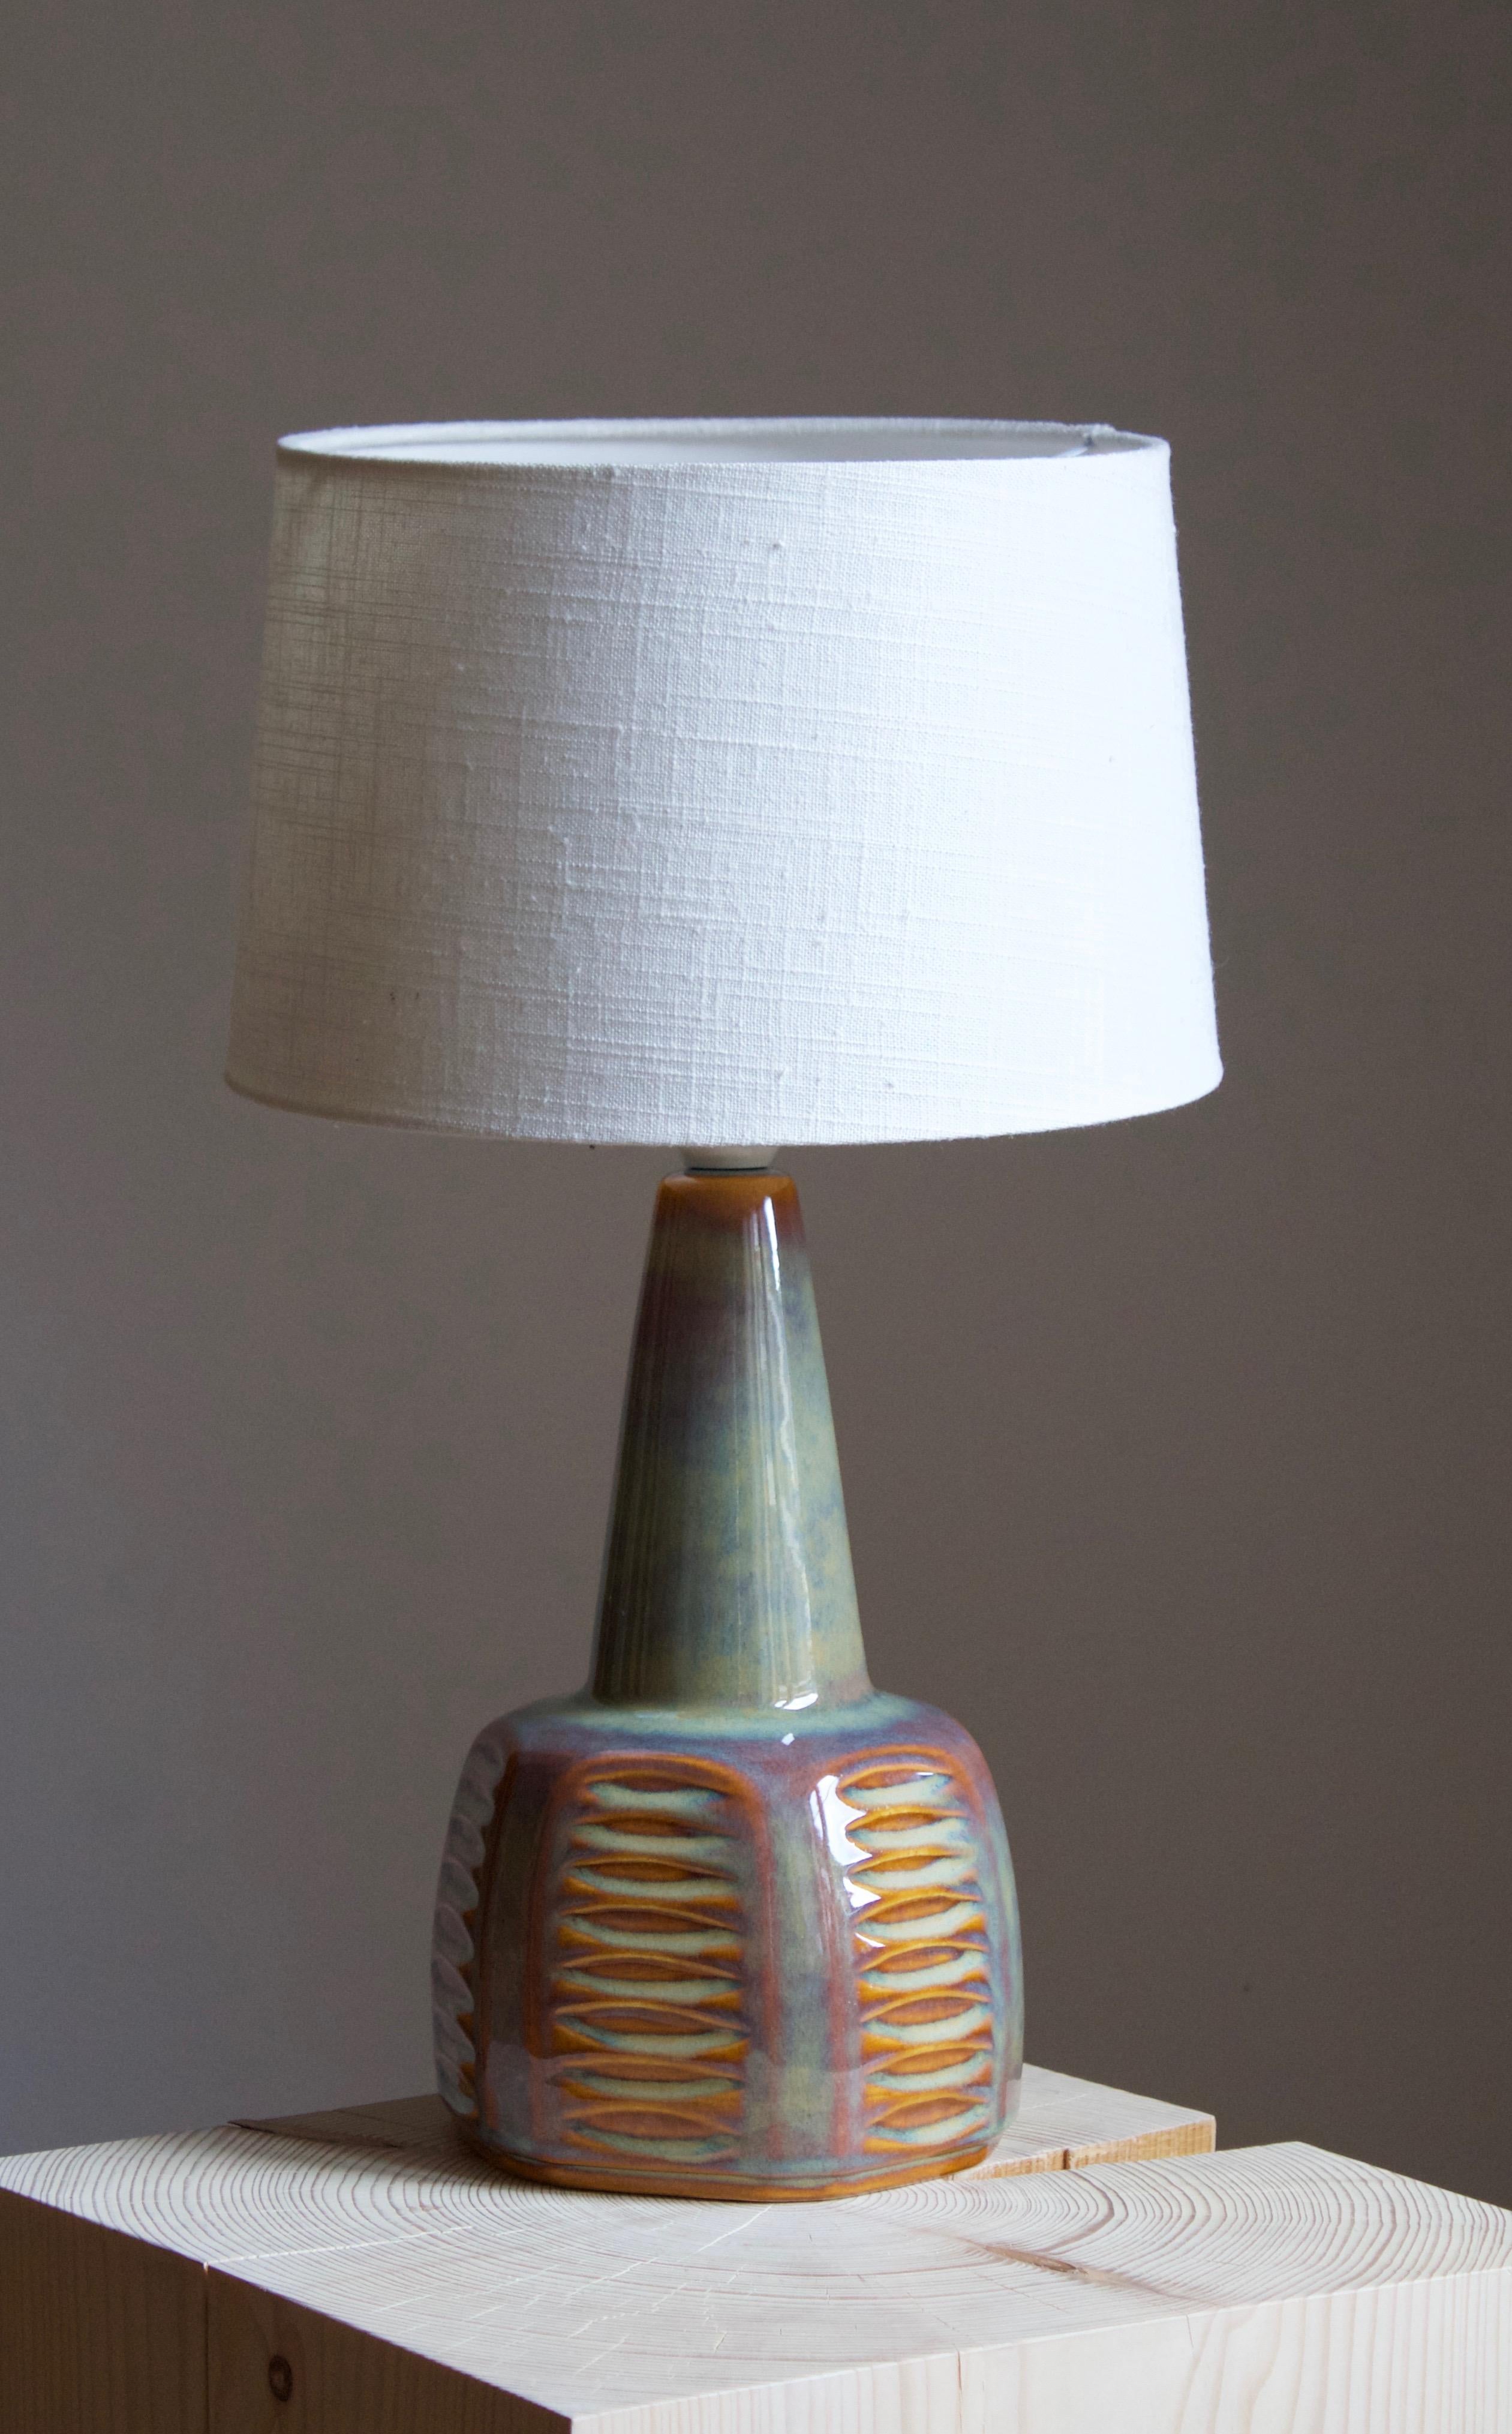 A table lamp produced by Søholm Keramik, located on the island of Bornholm in Denmark. Features a highly artistic glazed and incised decor. 

Sold without lampshade. Stated dimensions exclude the lampshade. Height includes socket.

Glaze features